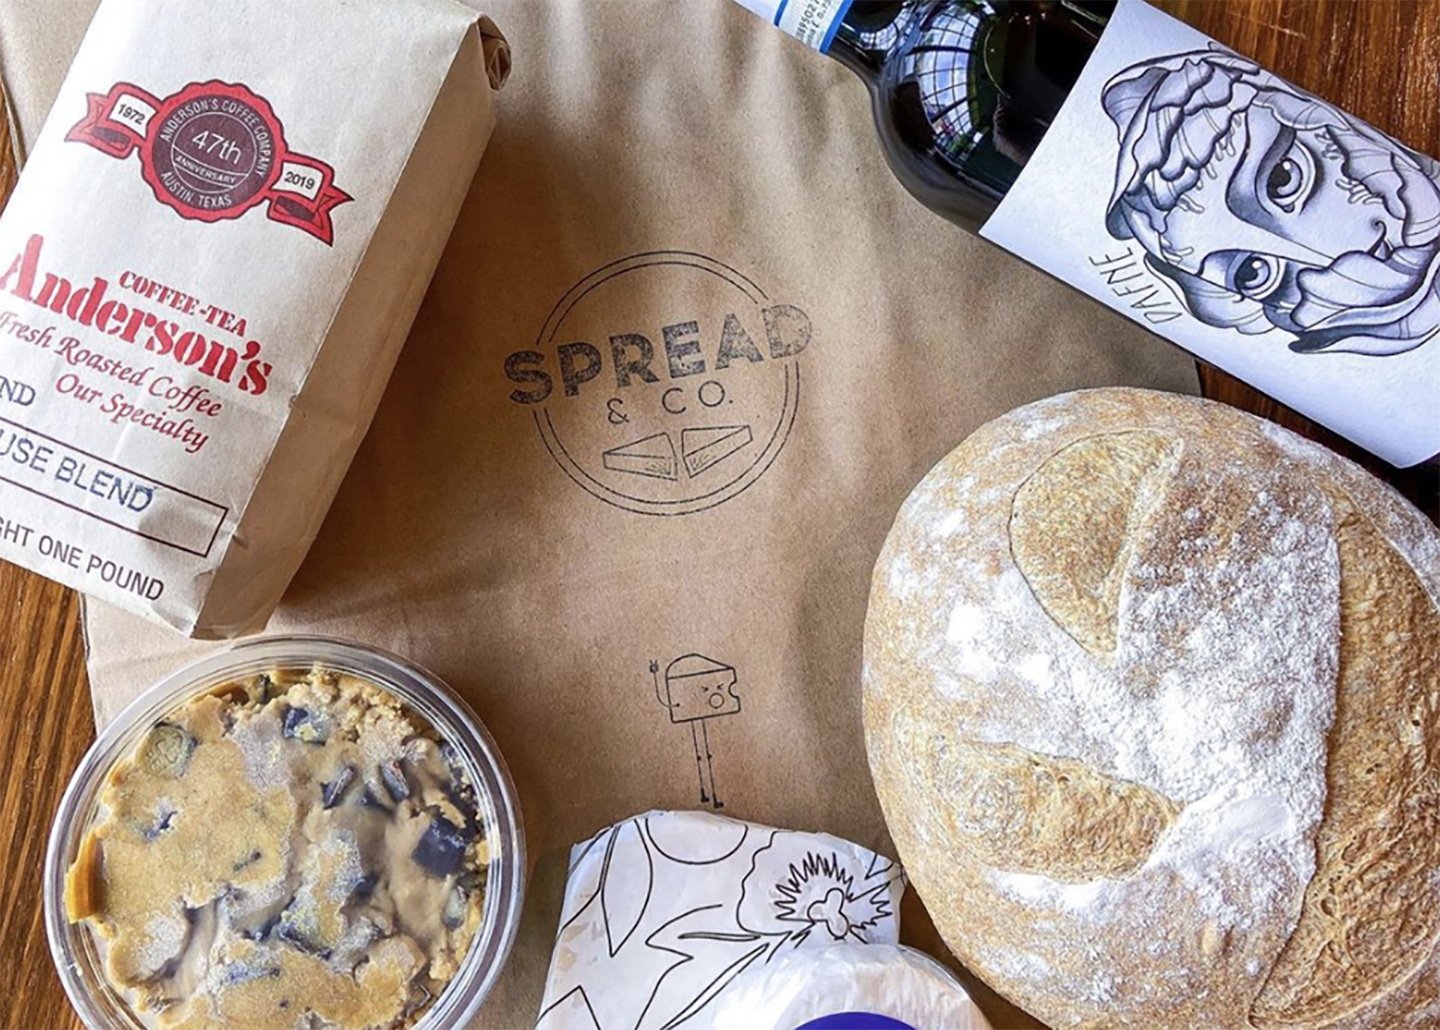 Spread & Co break and other snacks